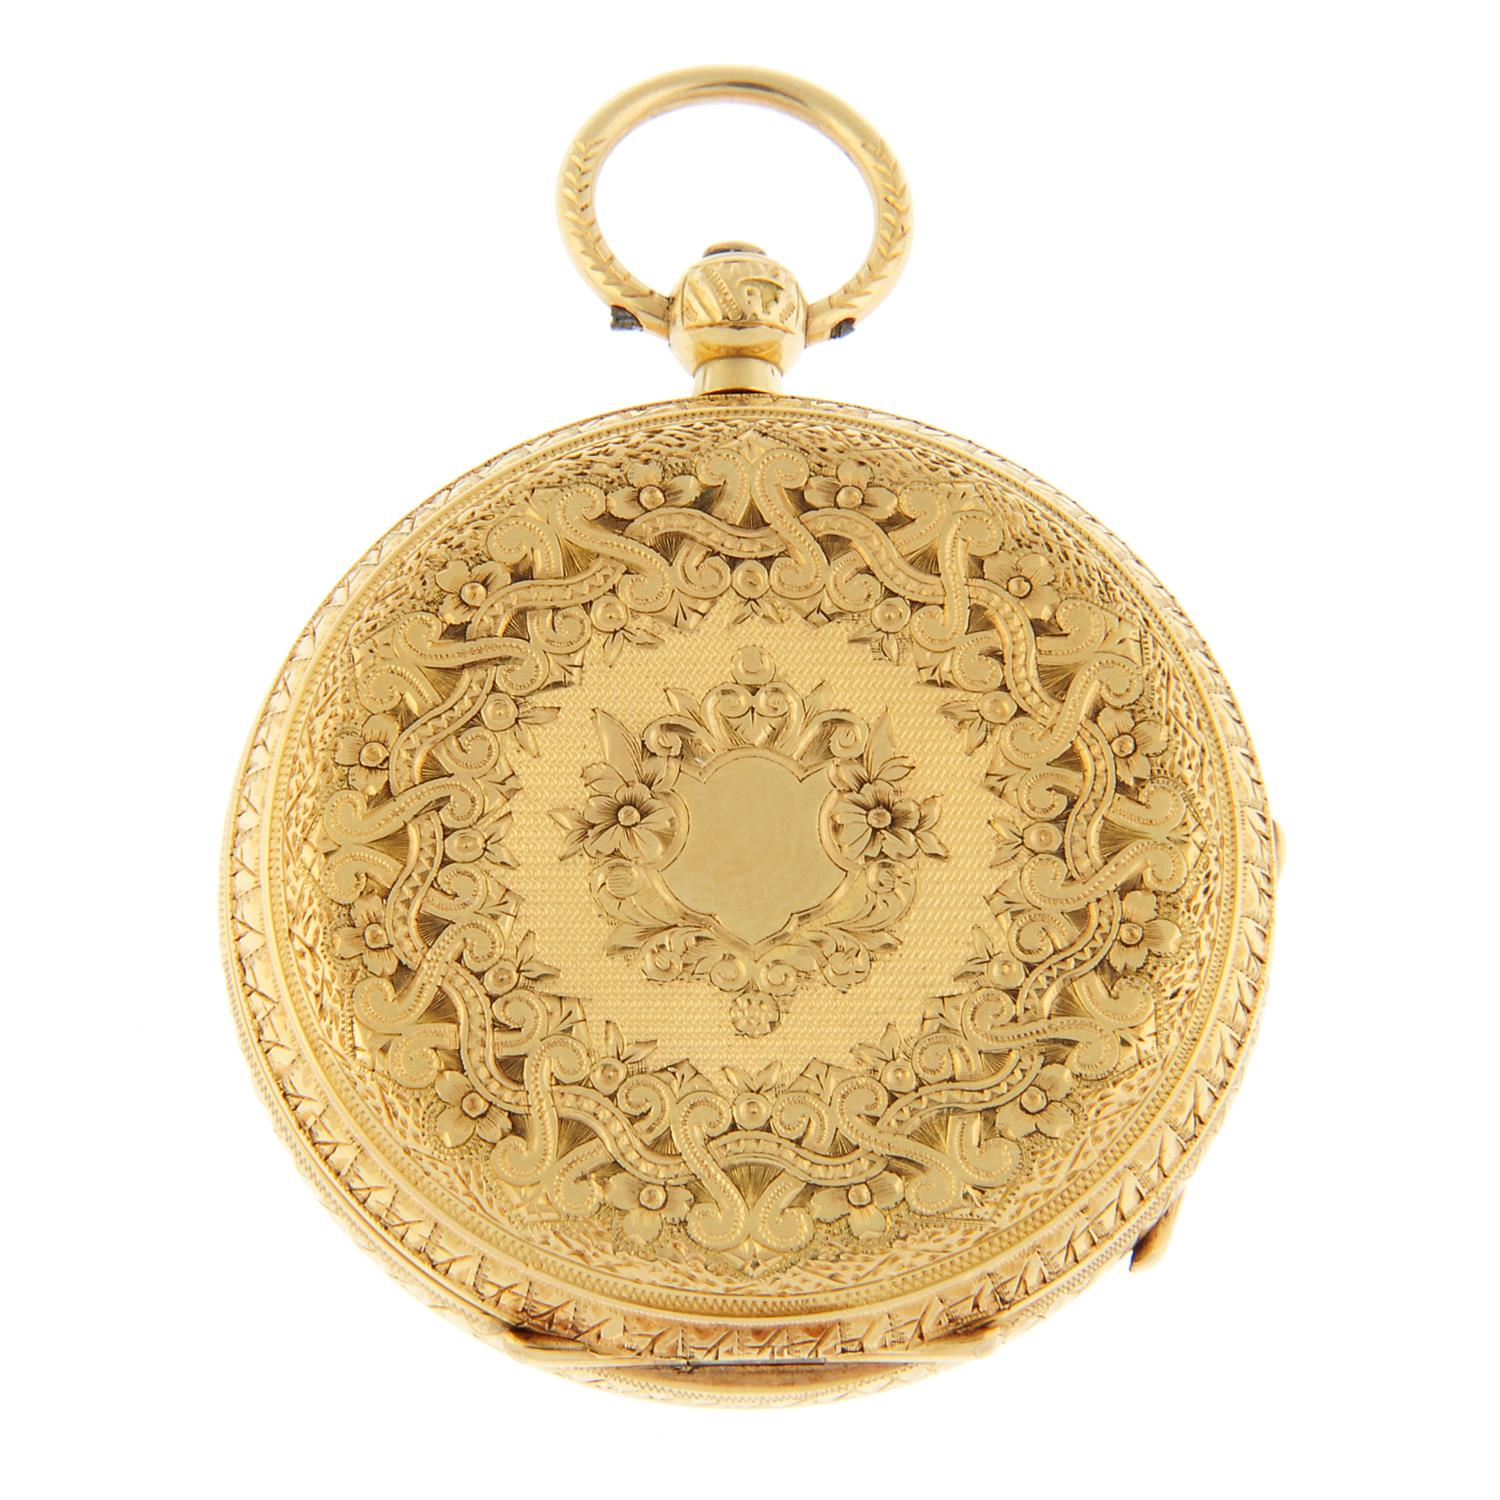 A pocket watch by C. Moody, 37mm. - Image 2 of 3